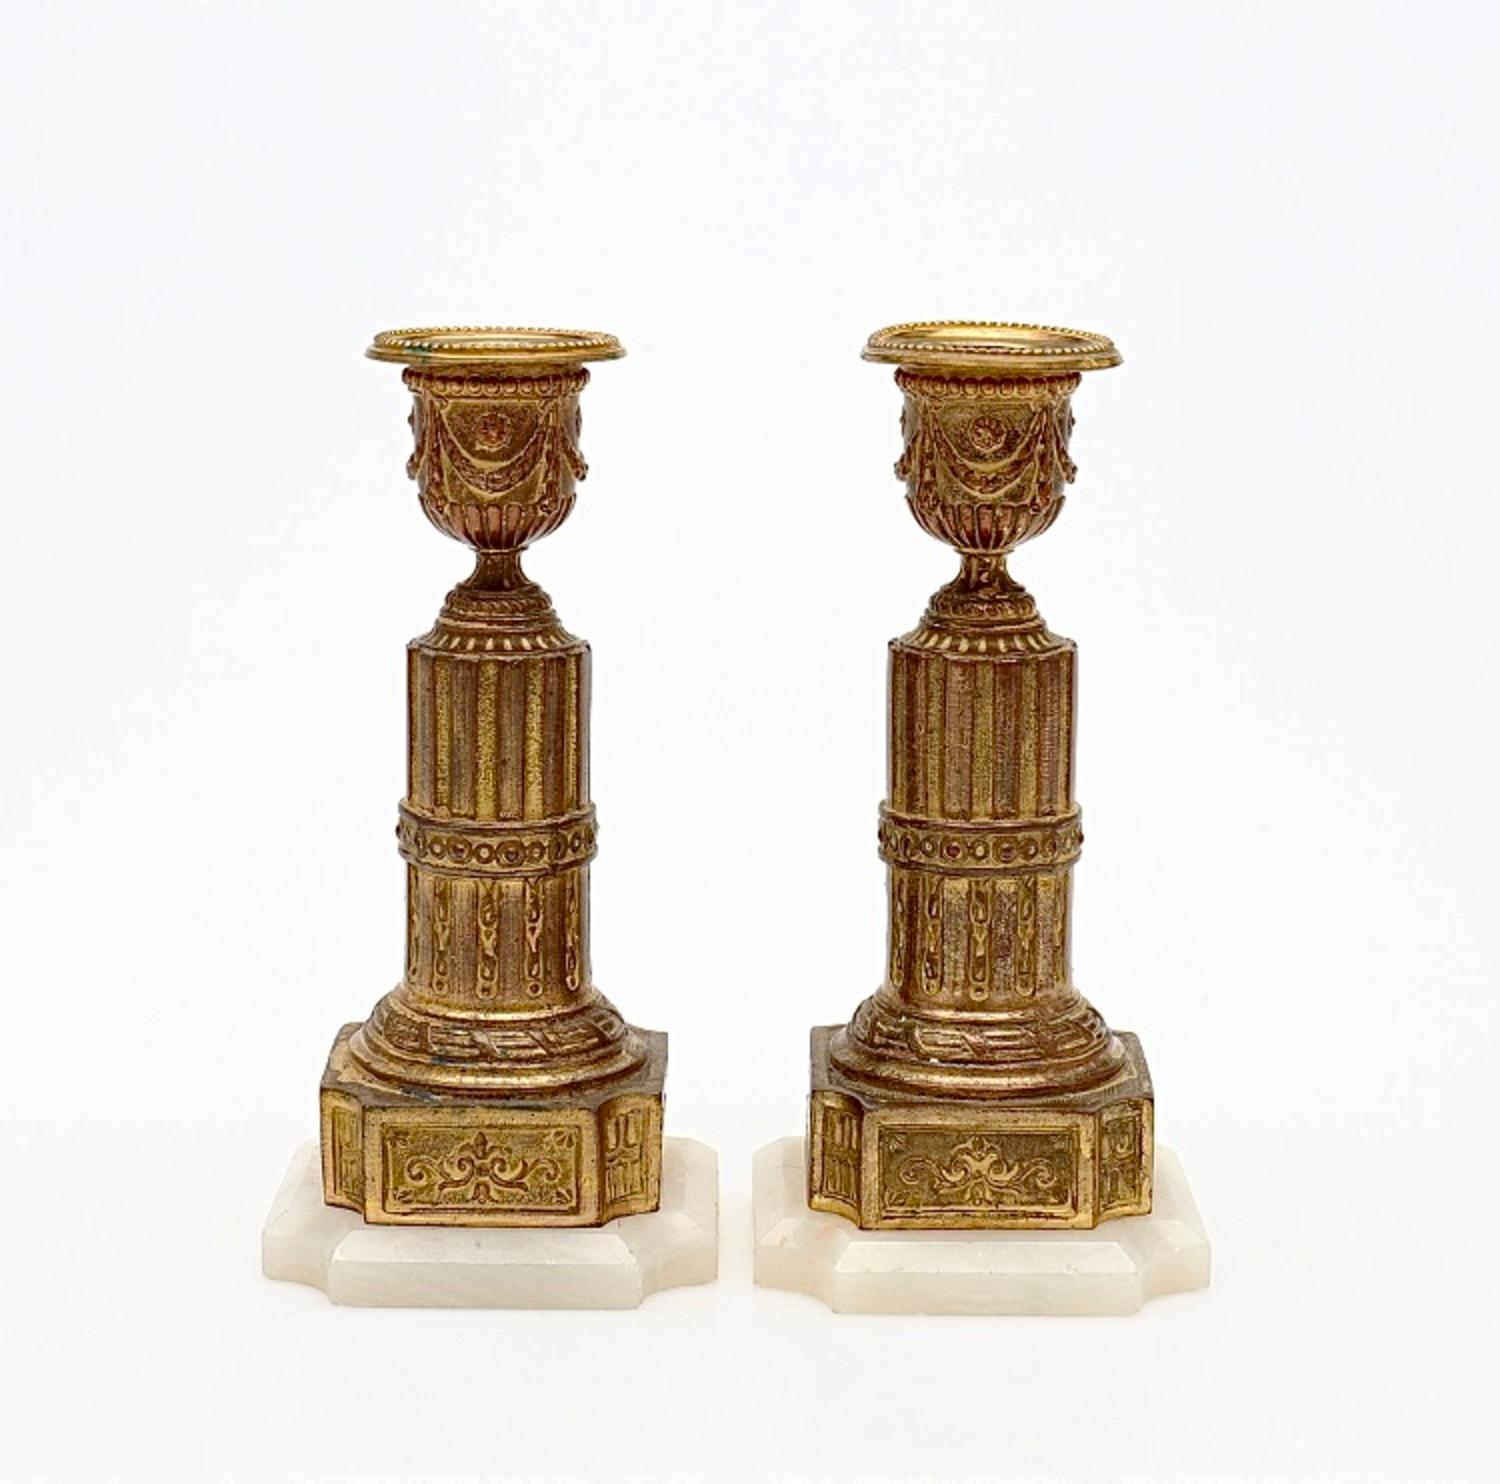 Pair of Louis XVI Style Gilt Metal and Alabaster Candlesticks